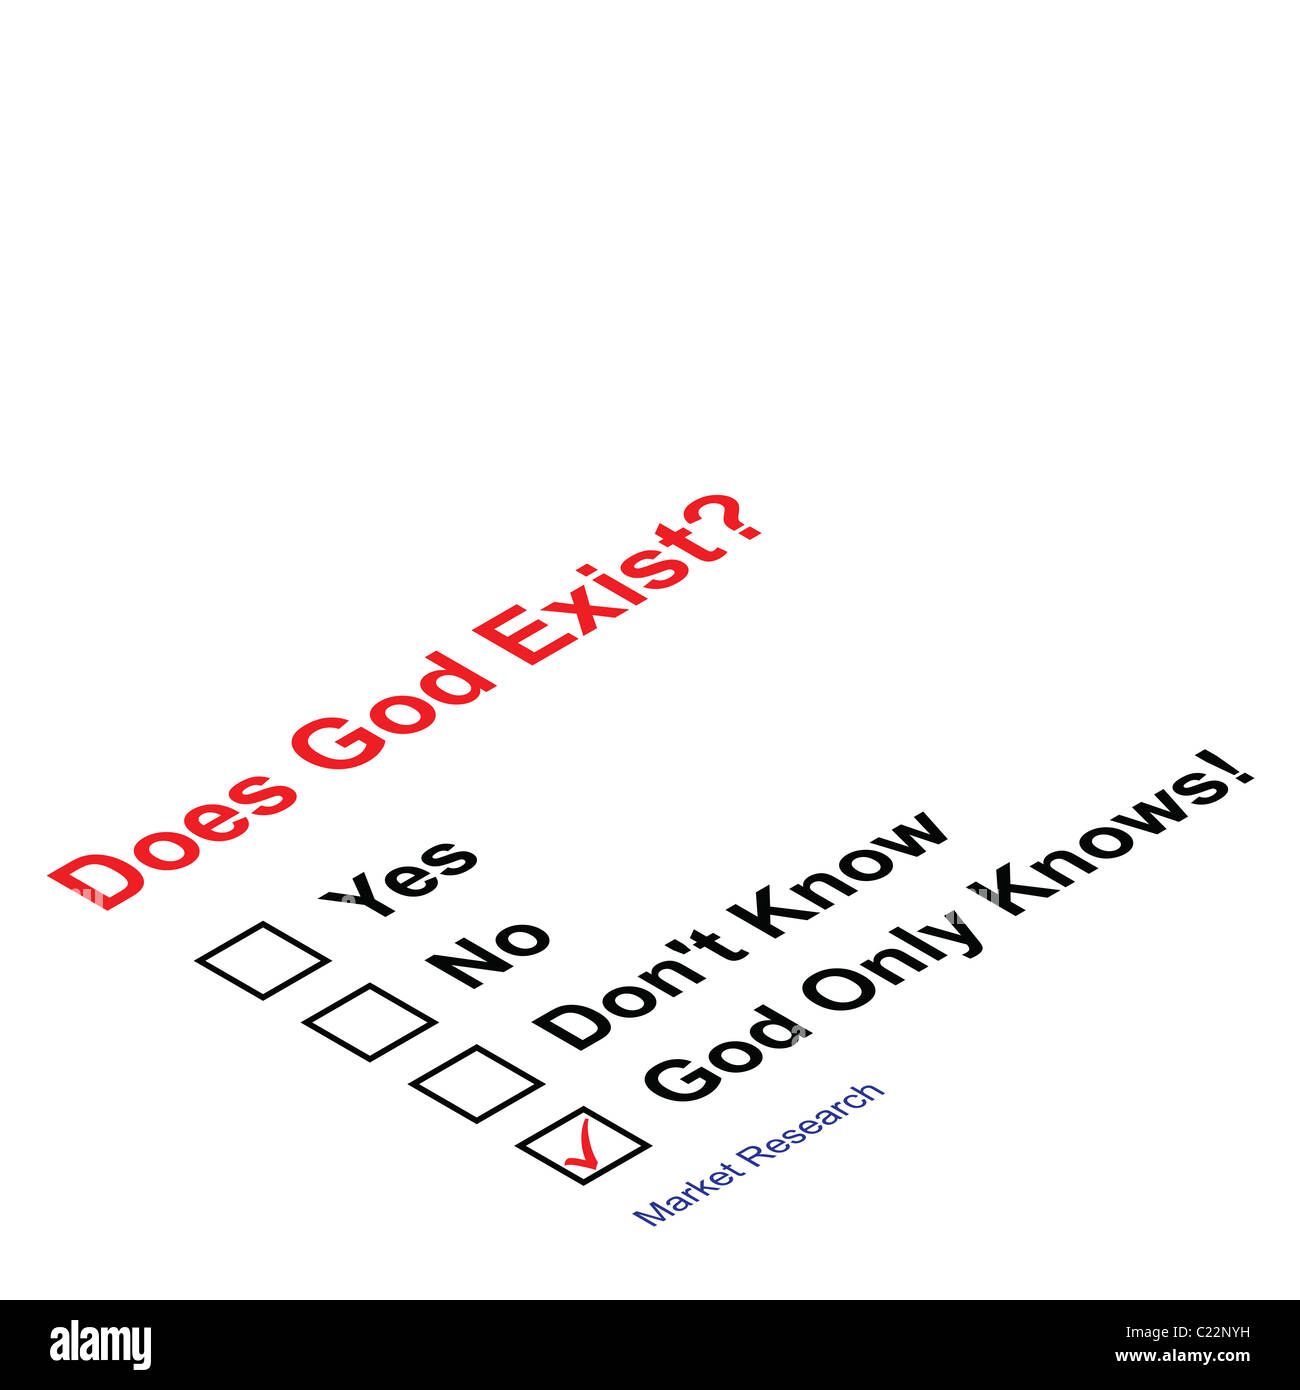 Market research asking does God exist questionnaire Stock Photo